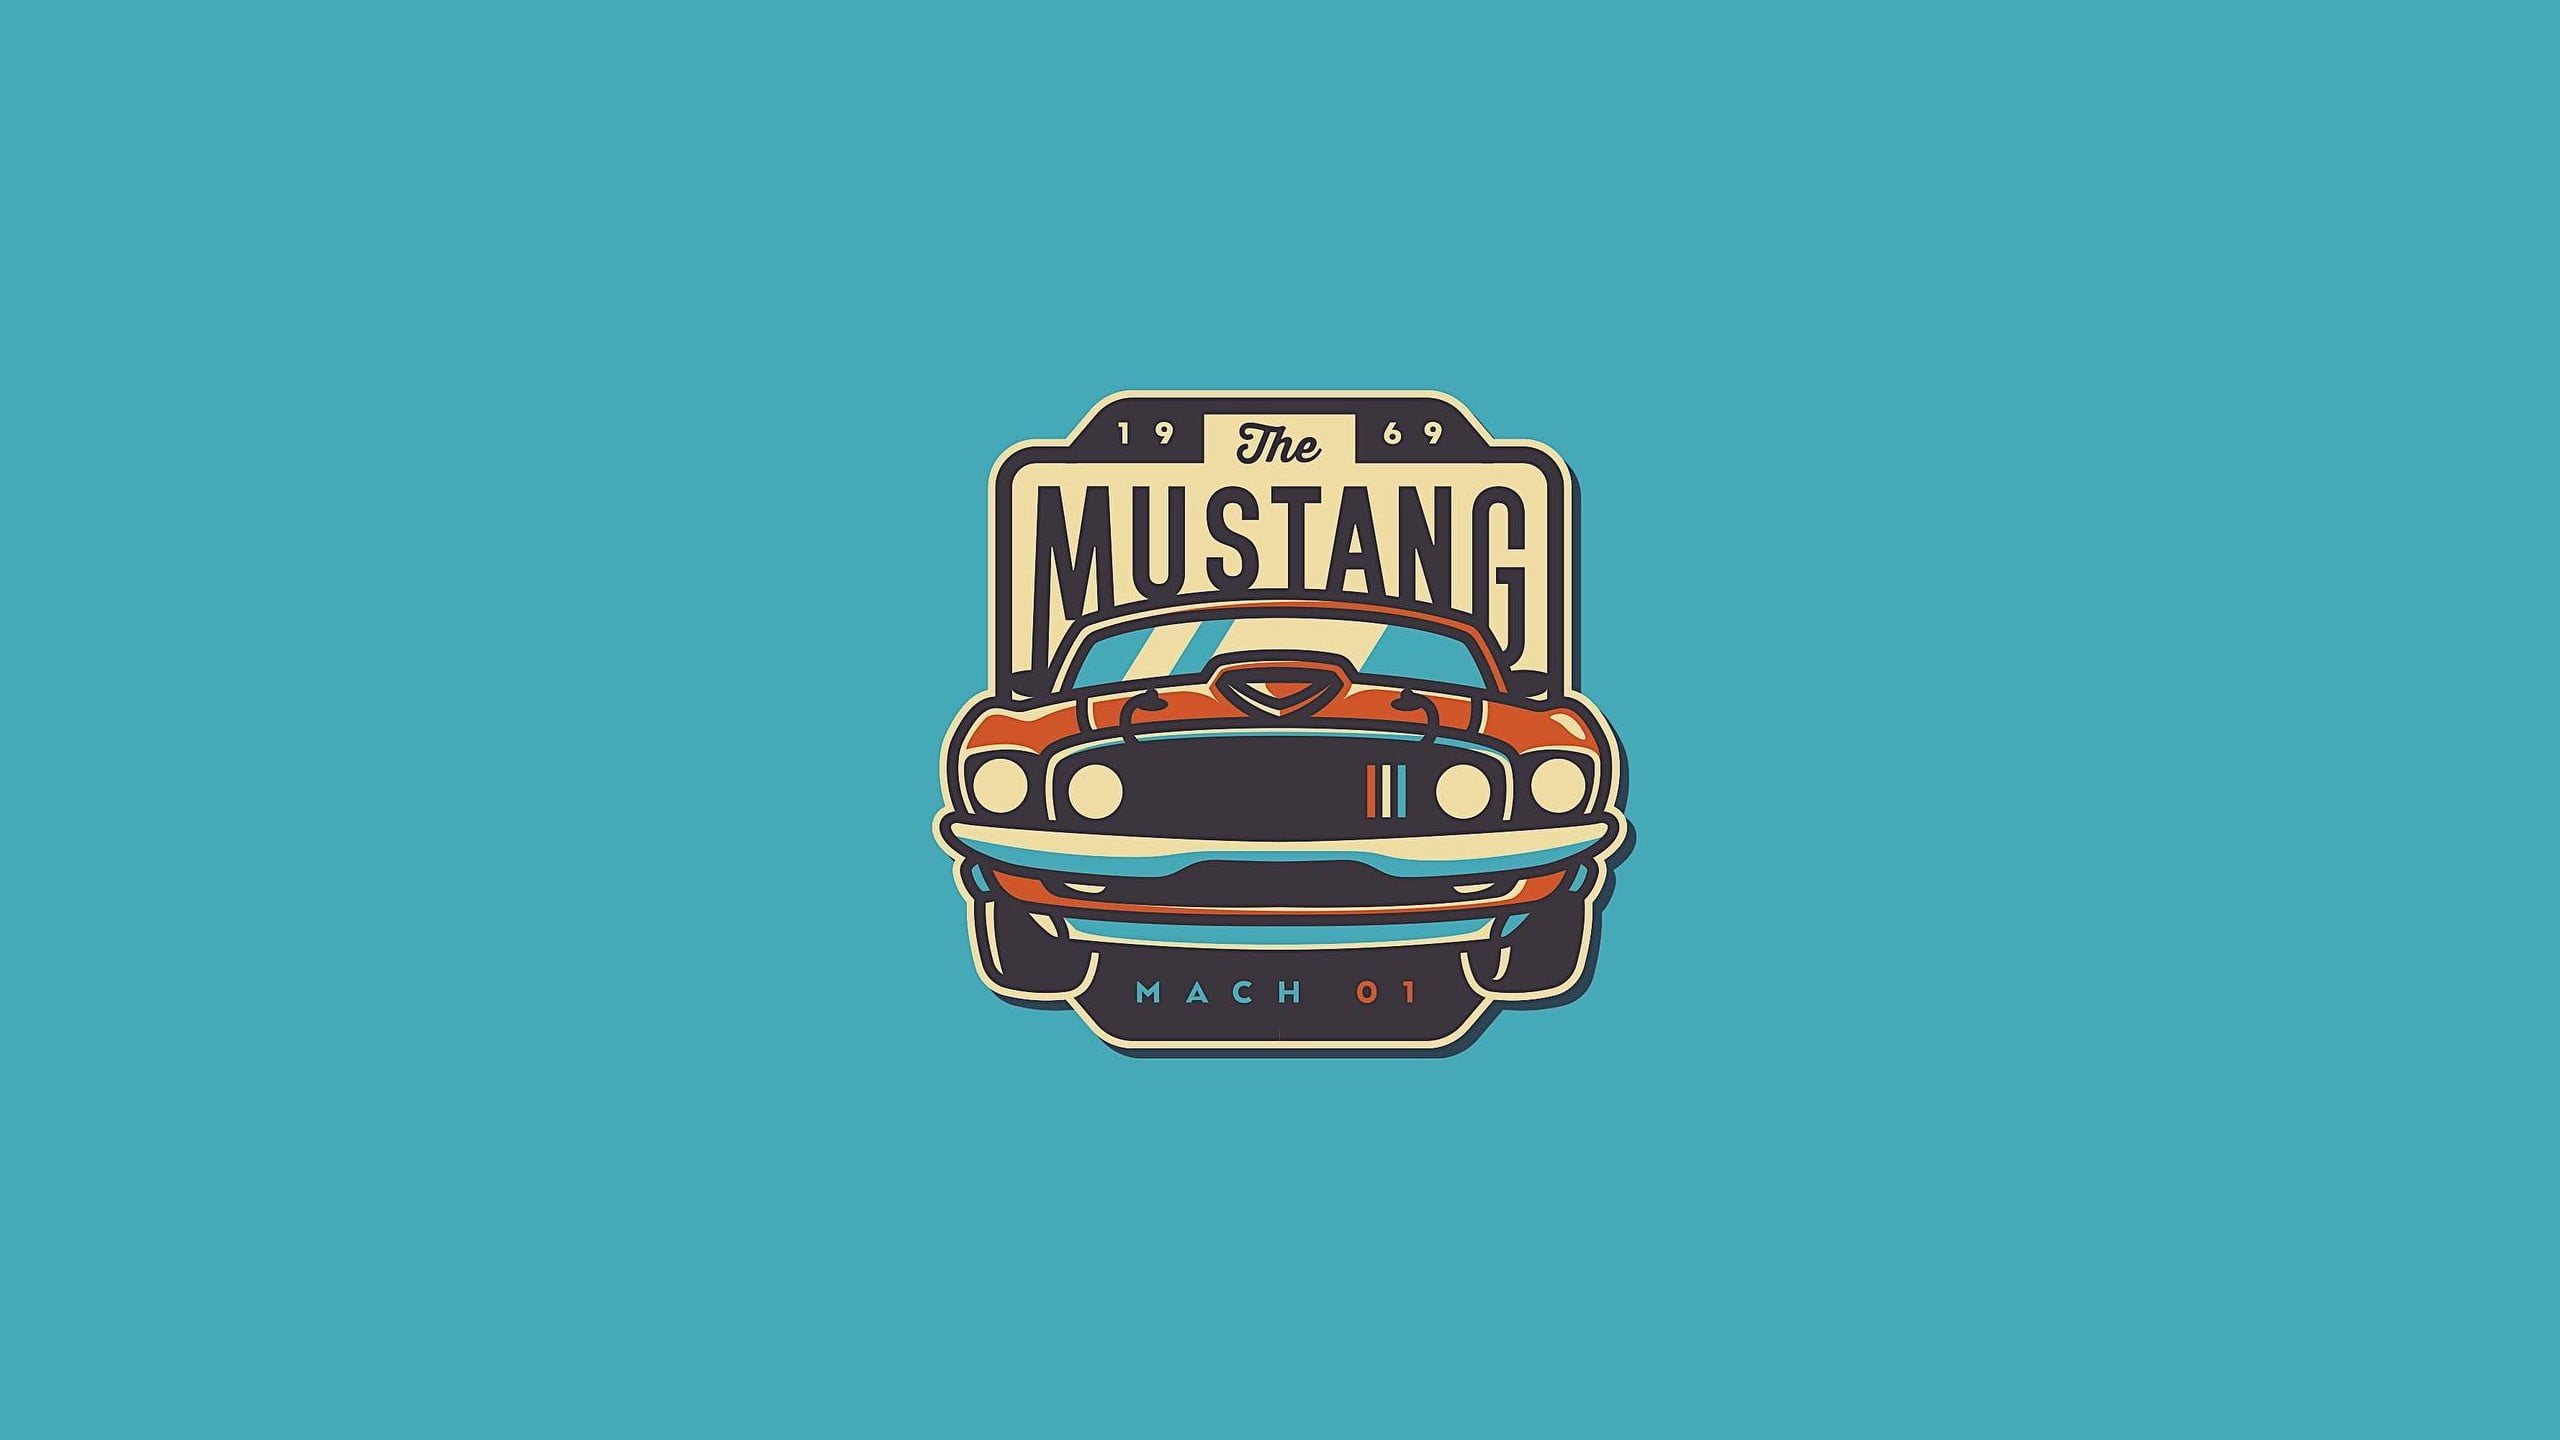 Download Treat Yourself To The Latest iPhone Featuring A Mustang Logo  Wallpaper | Wallpapers.com